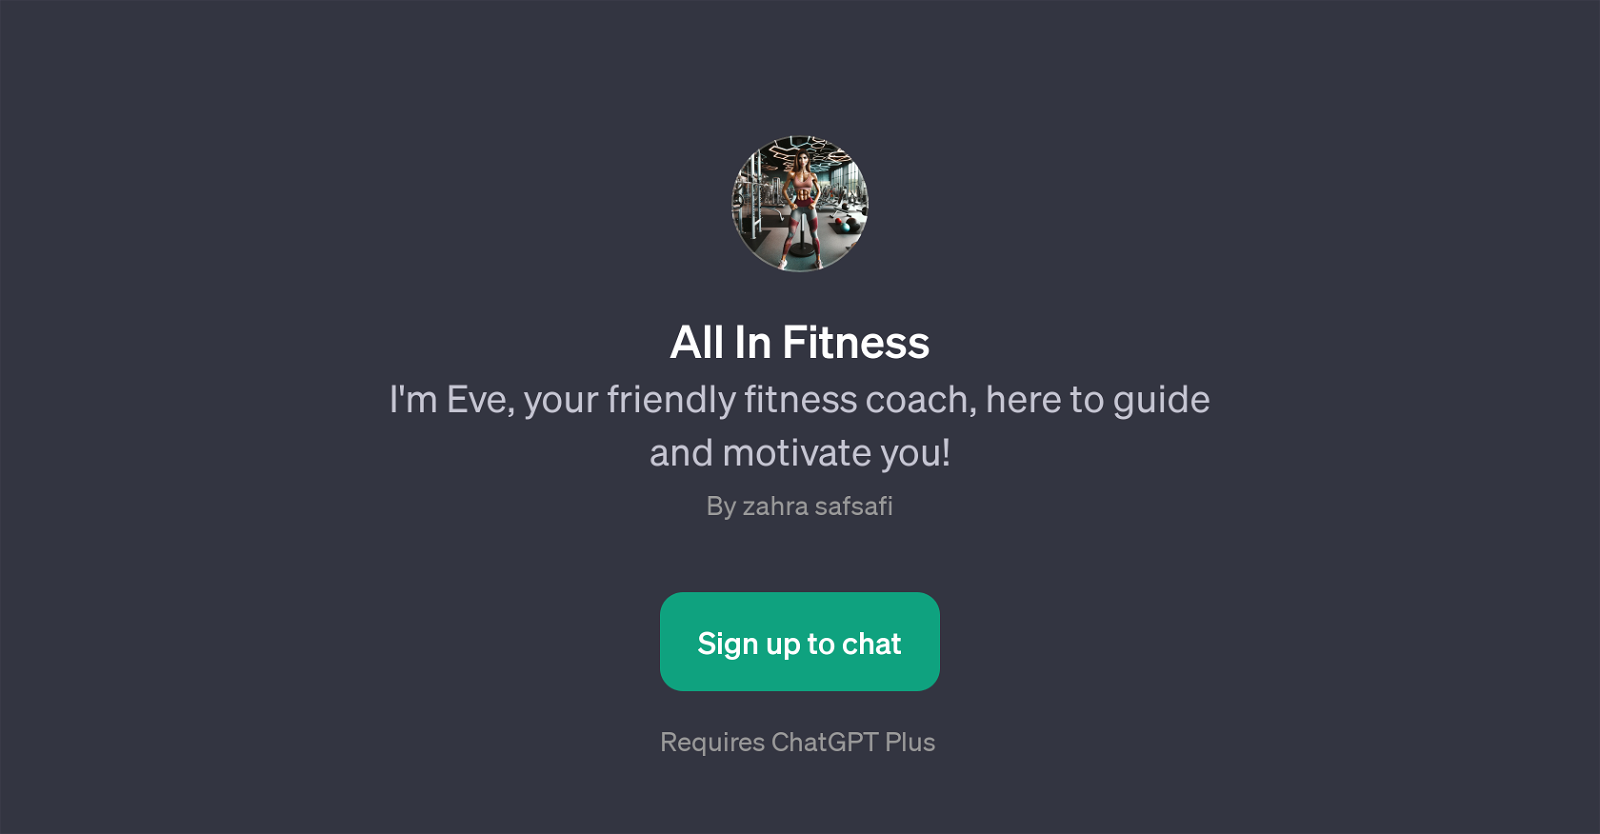 All In Fitness website